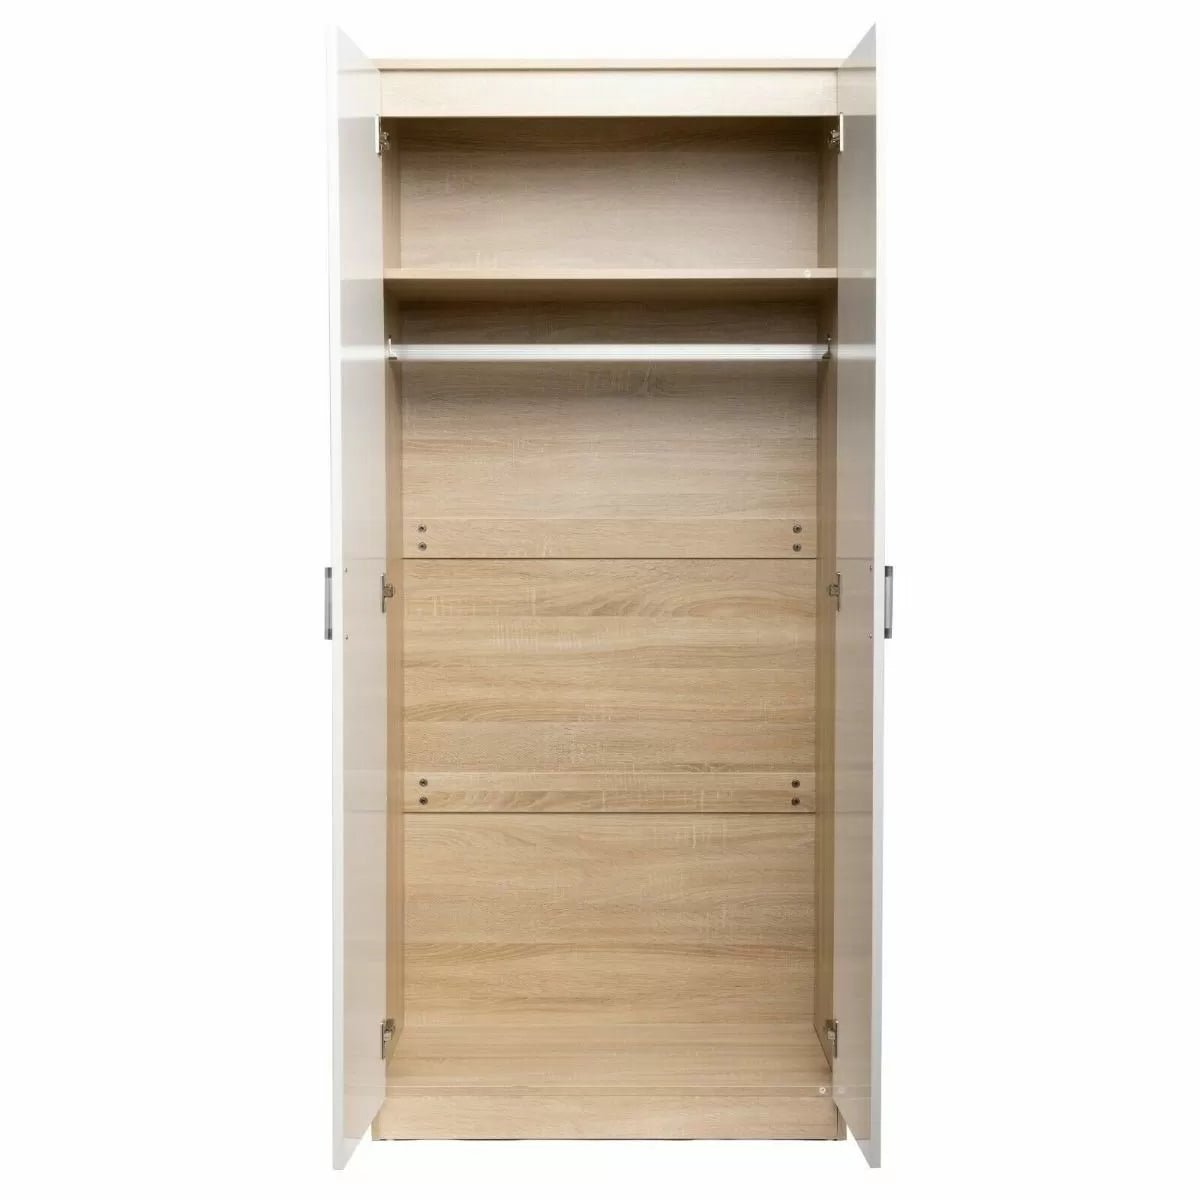 2 Door Wardrobe With Mirror With Large Cupboard Storage - 3 Colours